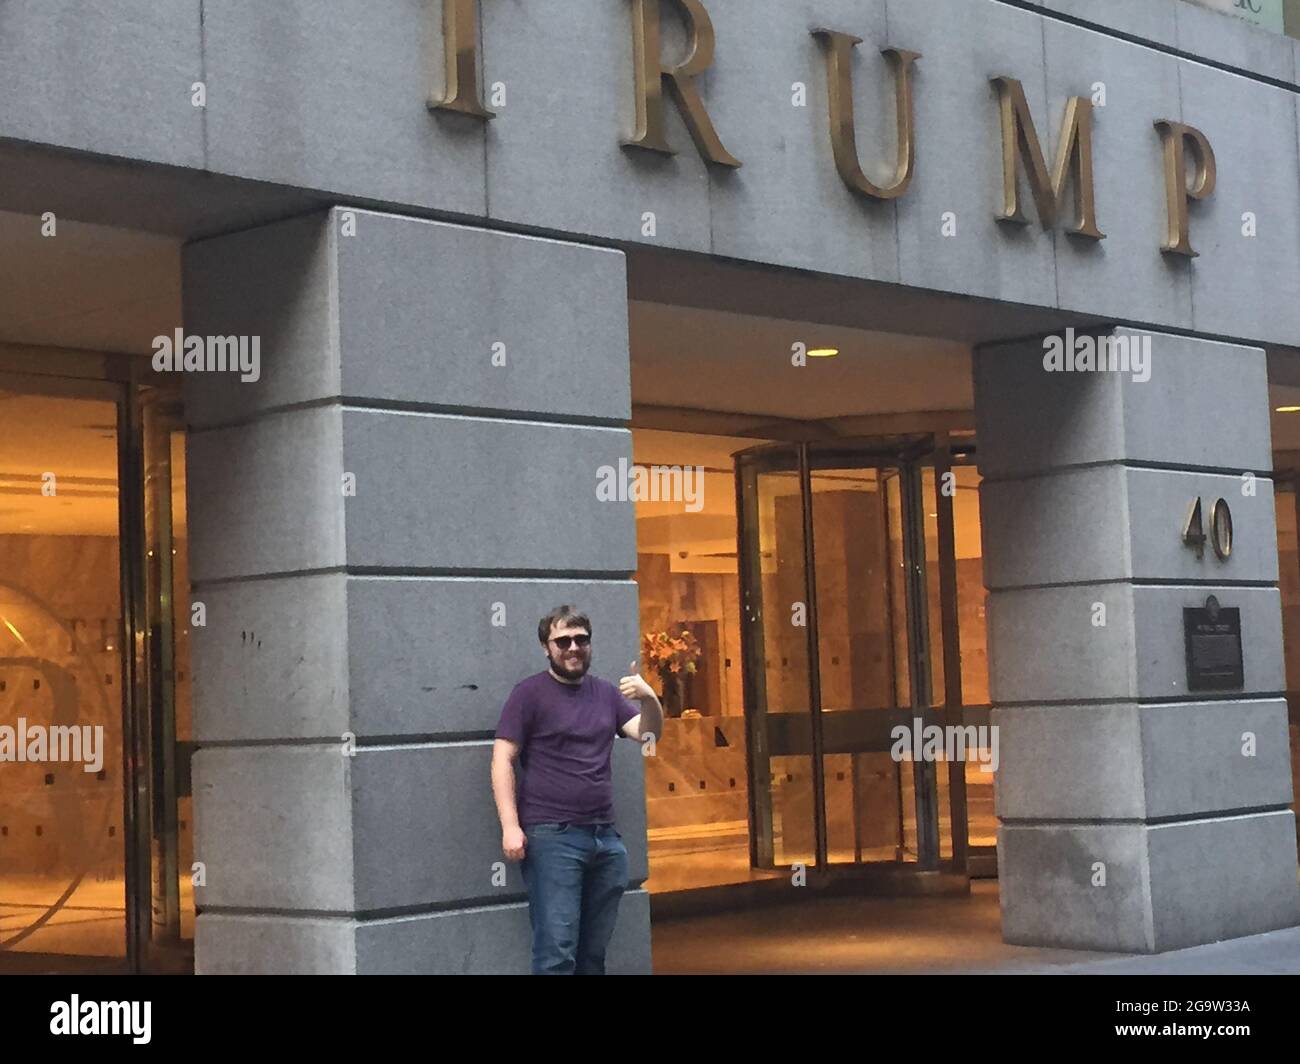 The Trump Building in New York Stock Photo